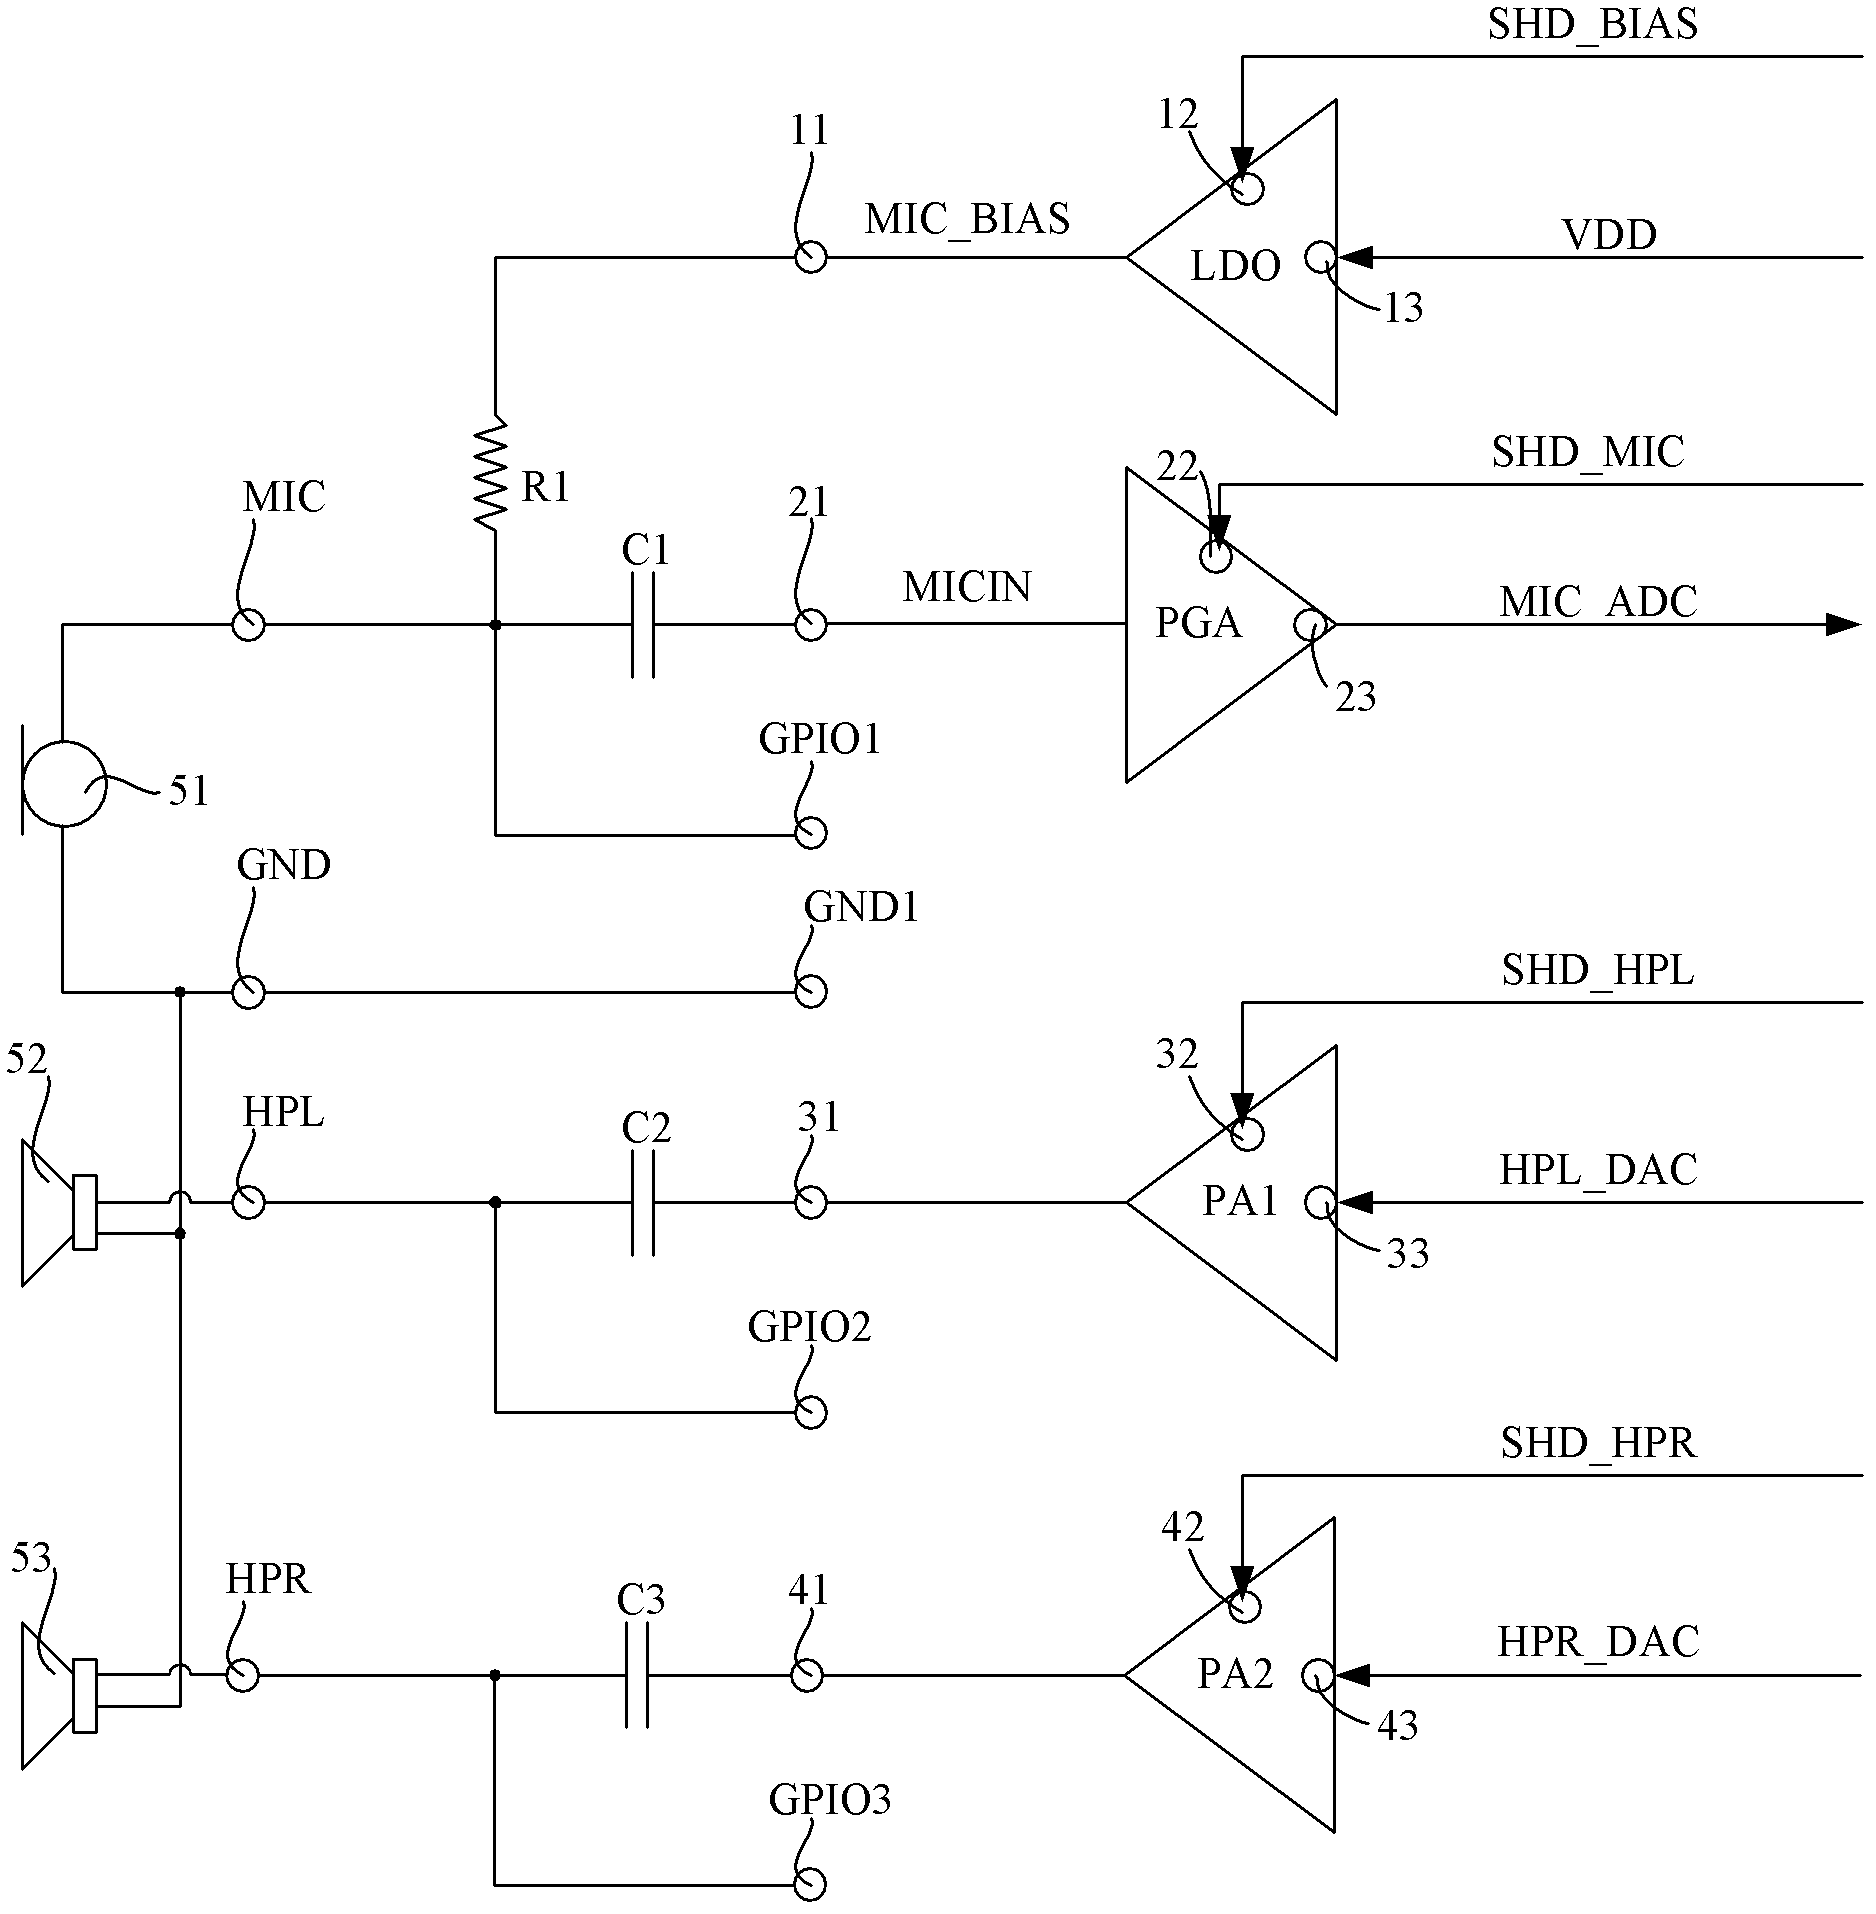 Headset interface and GPIO (General Purpose Input/Output) interface multiplex circuit structure